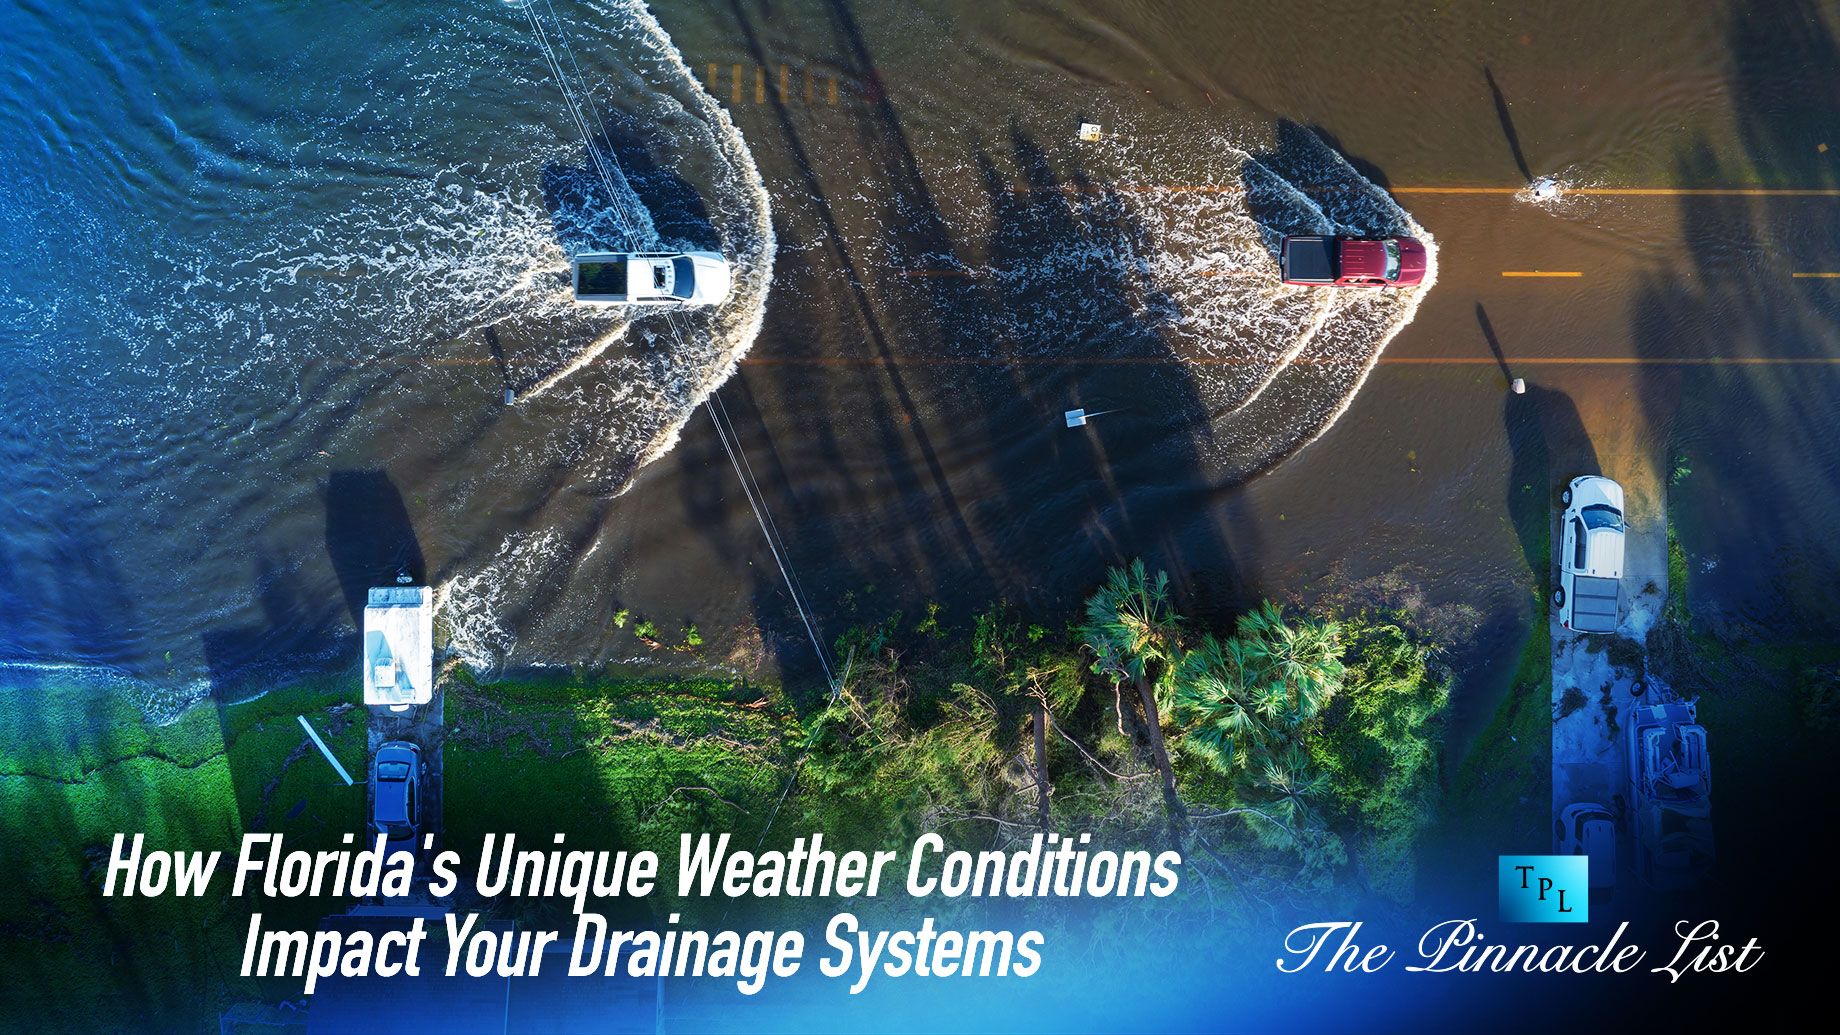 How Florida's Unique Weather Conditions Impact Your Drainage Systems